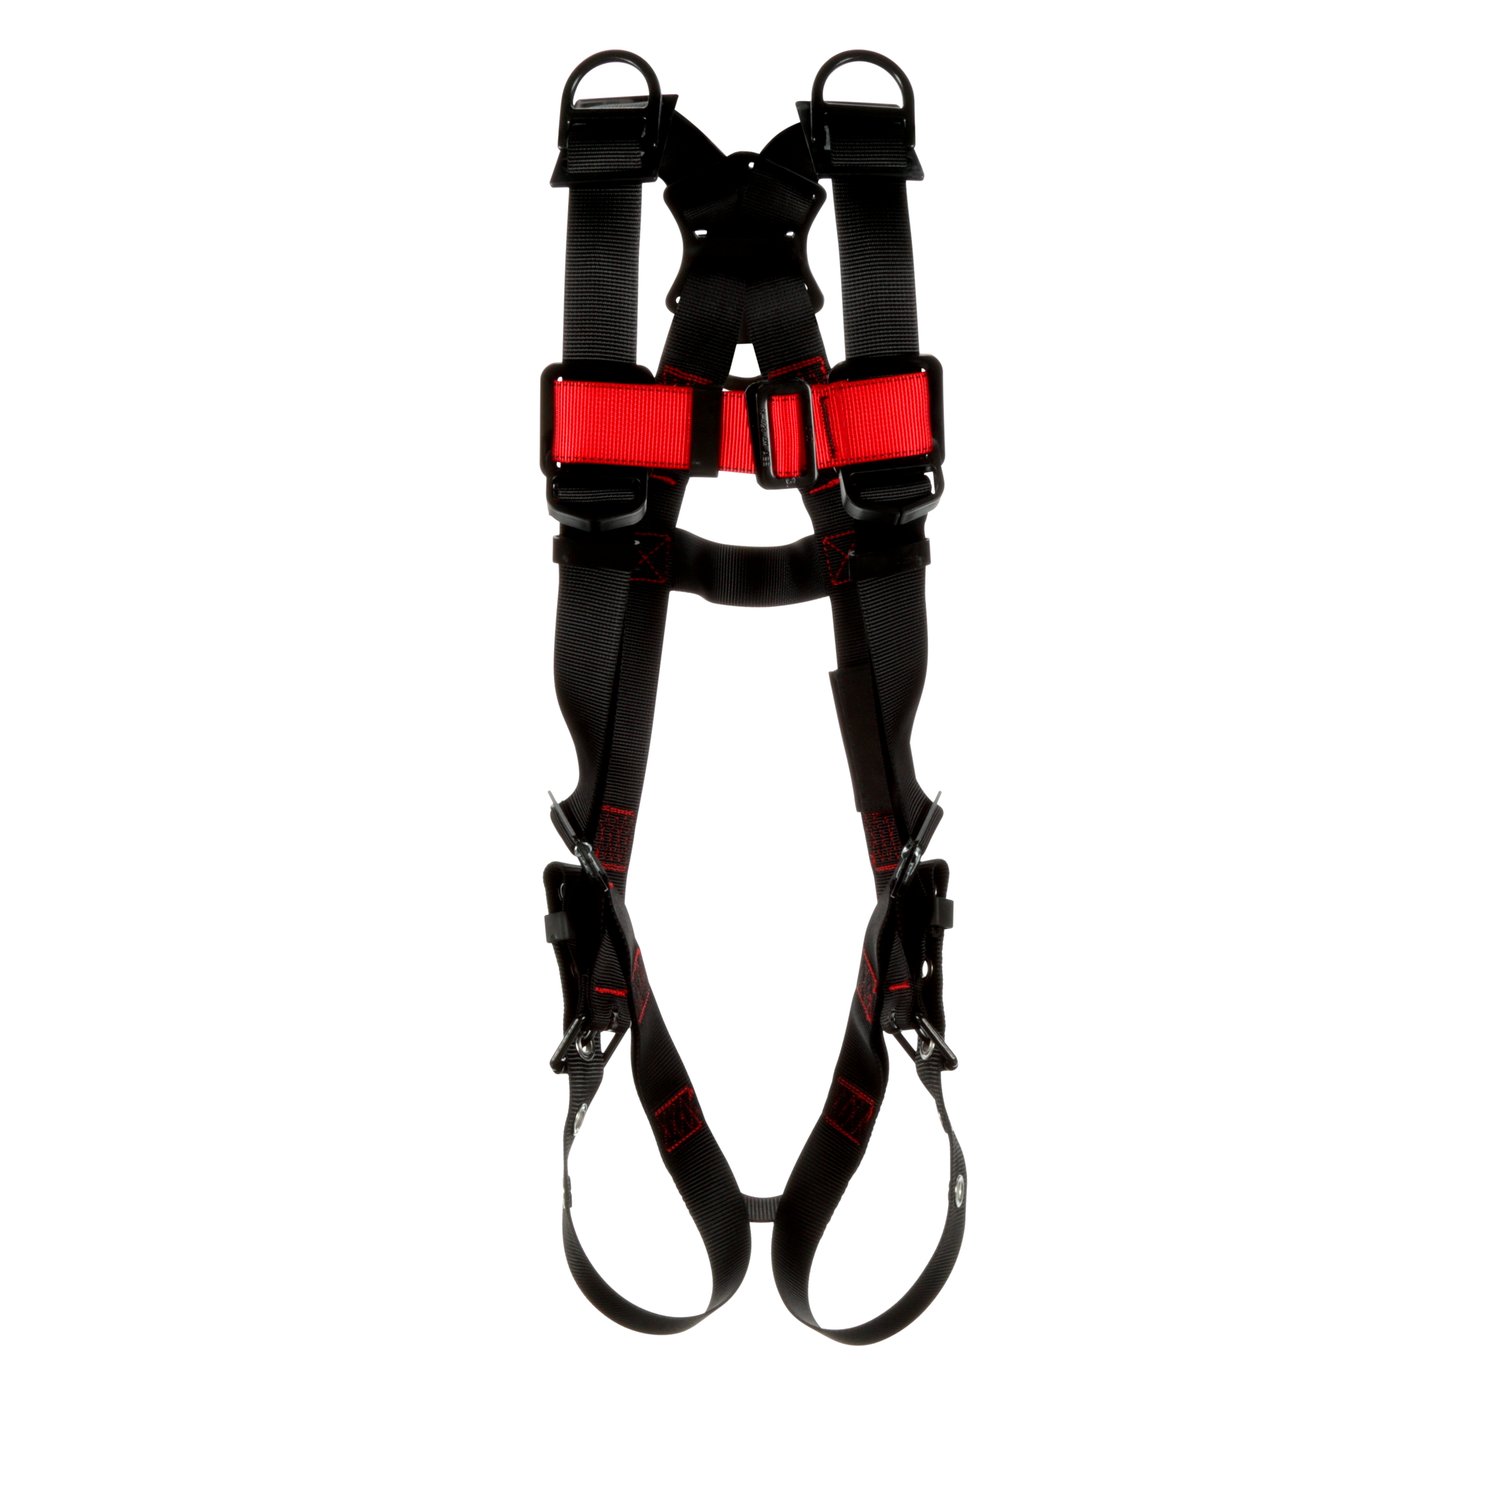 7012816811 - 3M Protecta P200 Vest Retrieval Safety Harness 1161549, Small